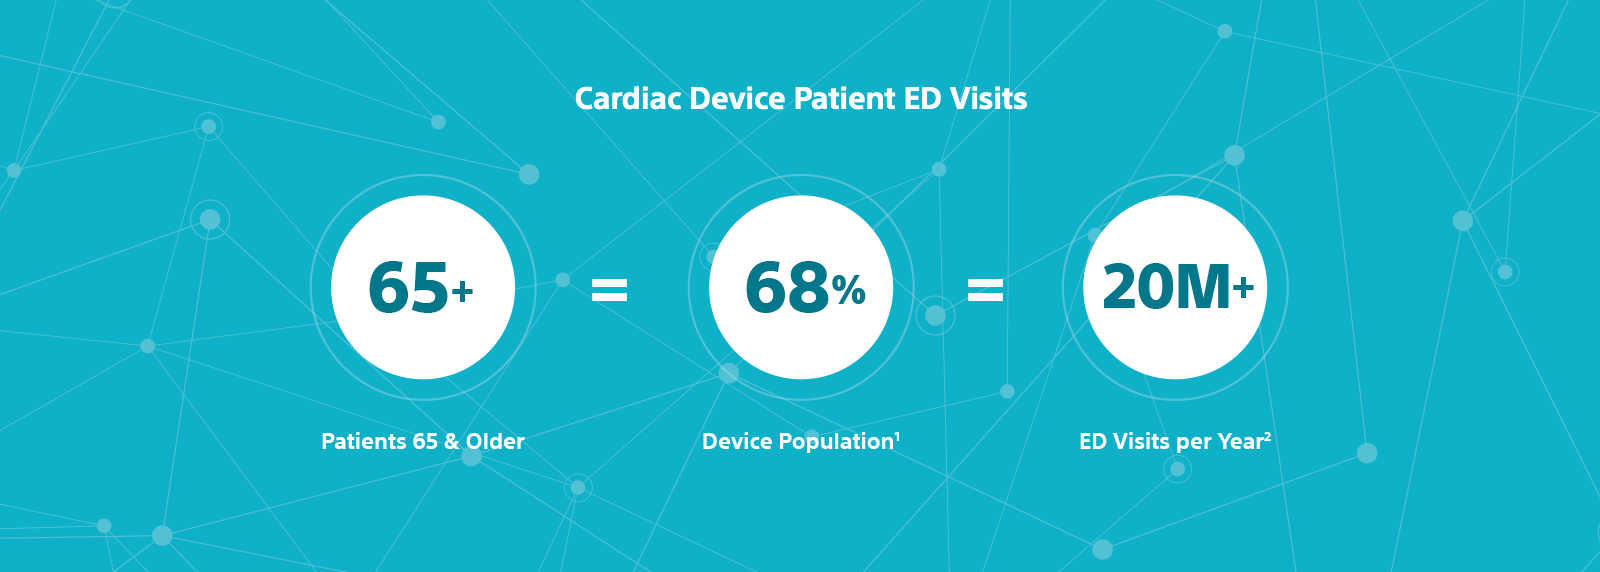 Graphic showing patients 65+ equal 68% of the device population, which account for over 20 million emergency department visits per year.